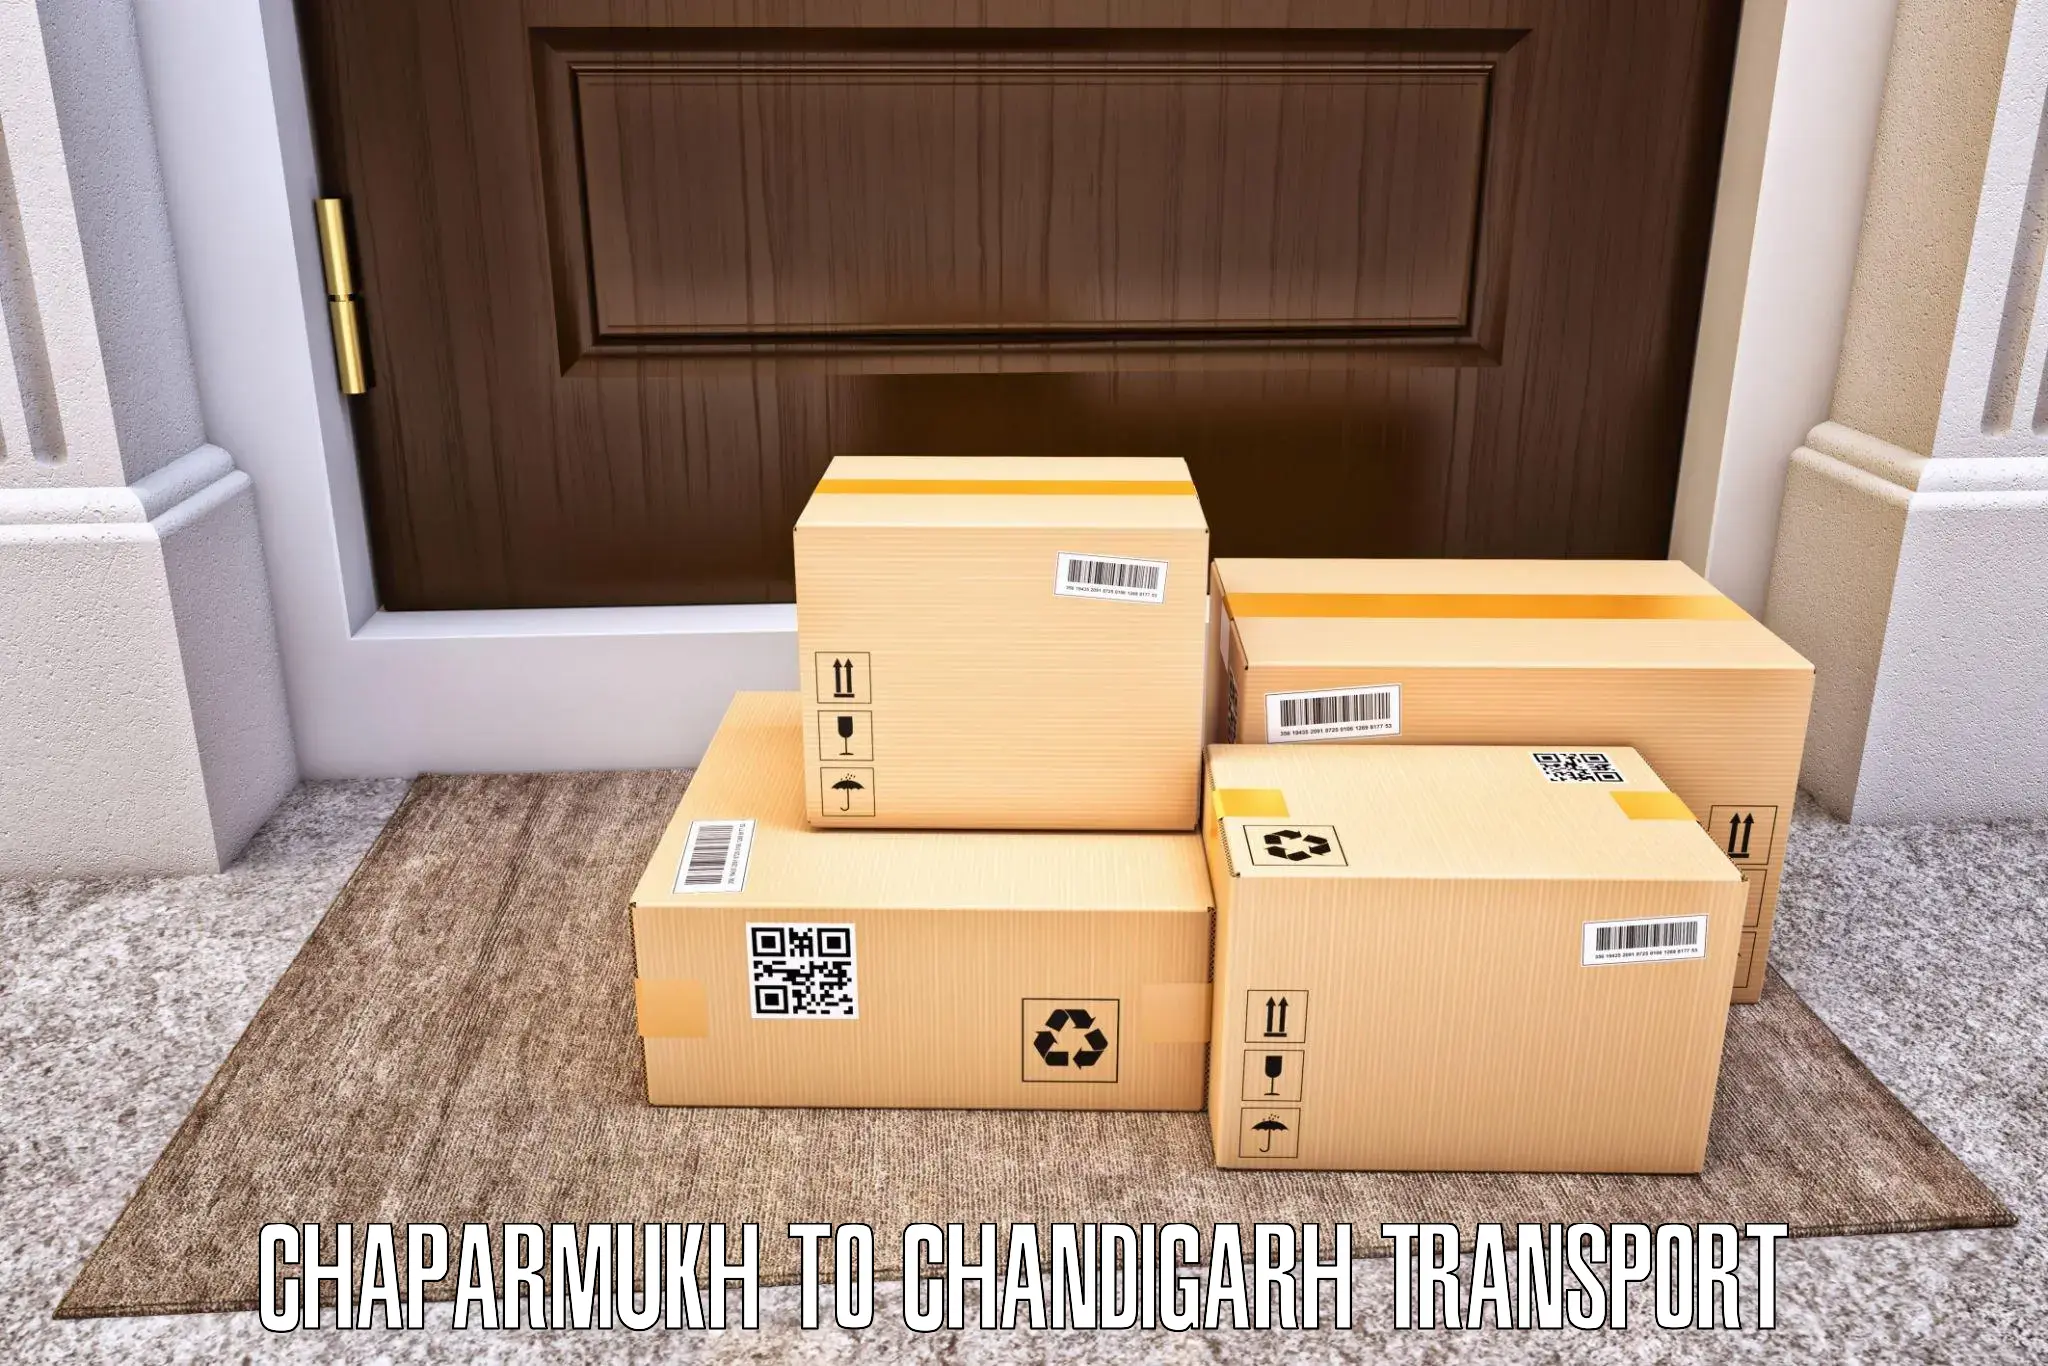 Parcel transport services Chaparmukh to Chandigarh